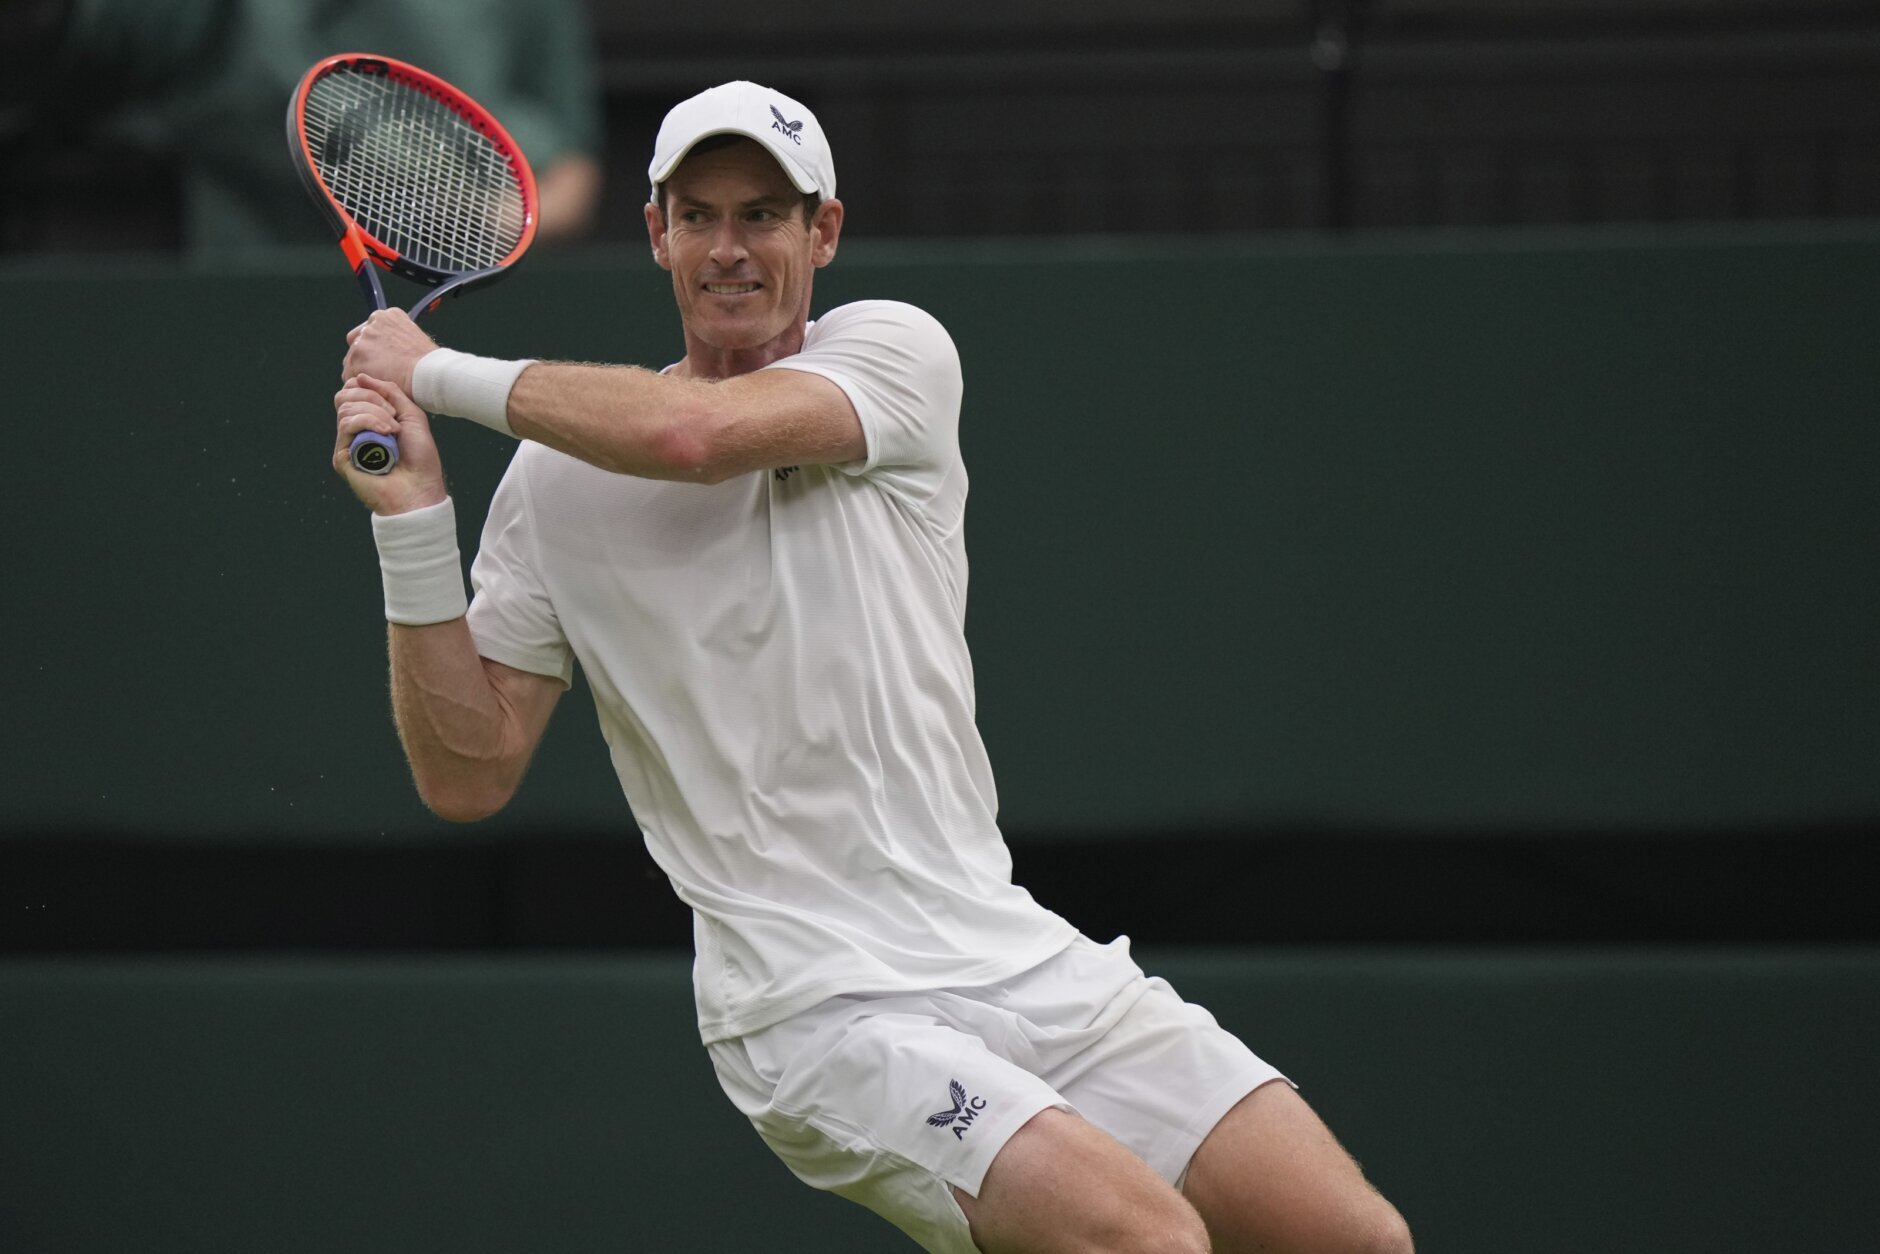 Andy Murray gets a win at rainy Wimbledon and a thumbs-up from Roger Federer